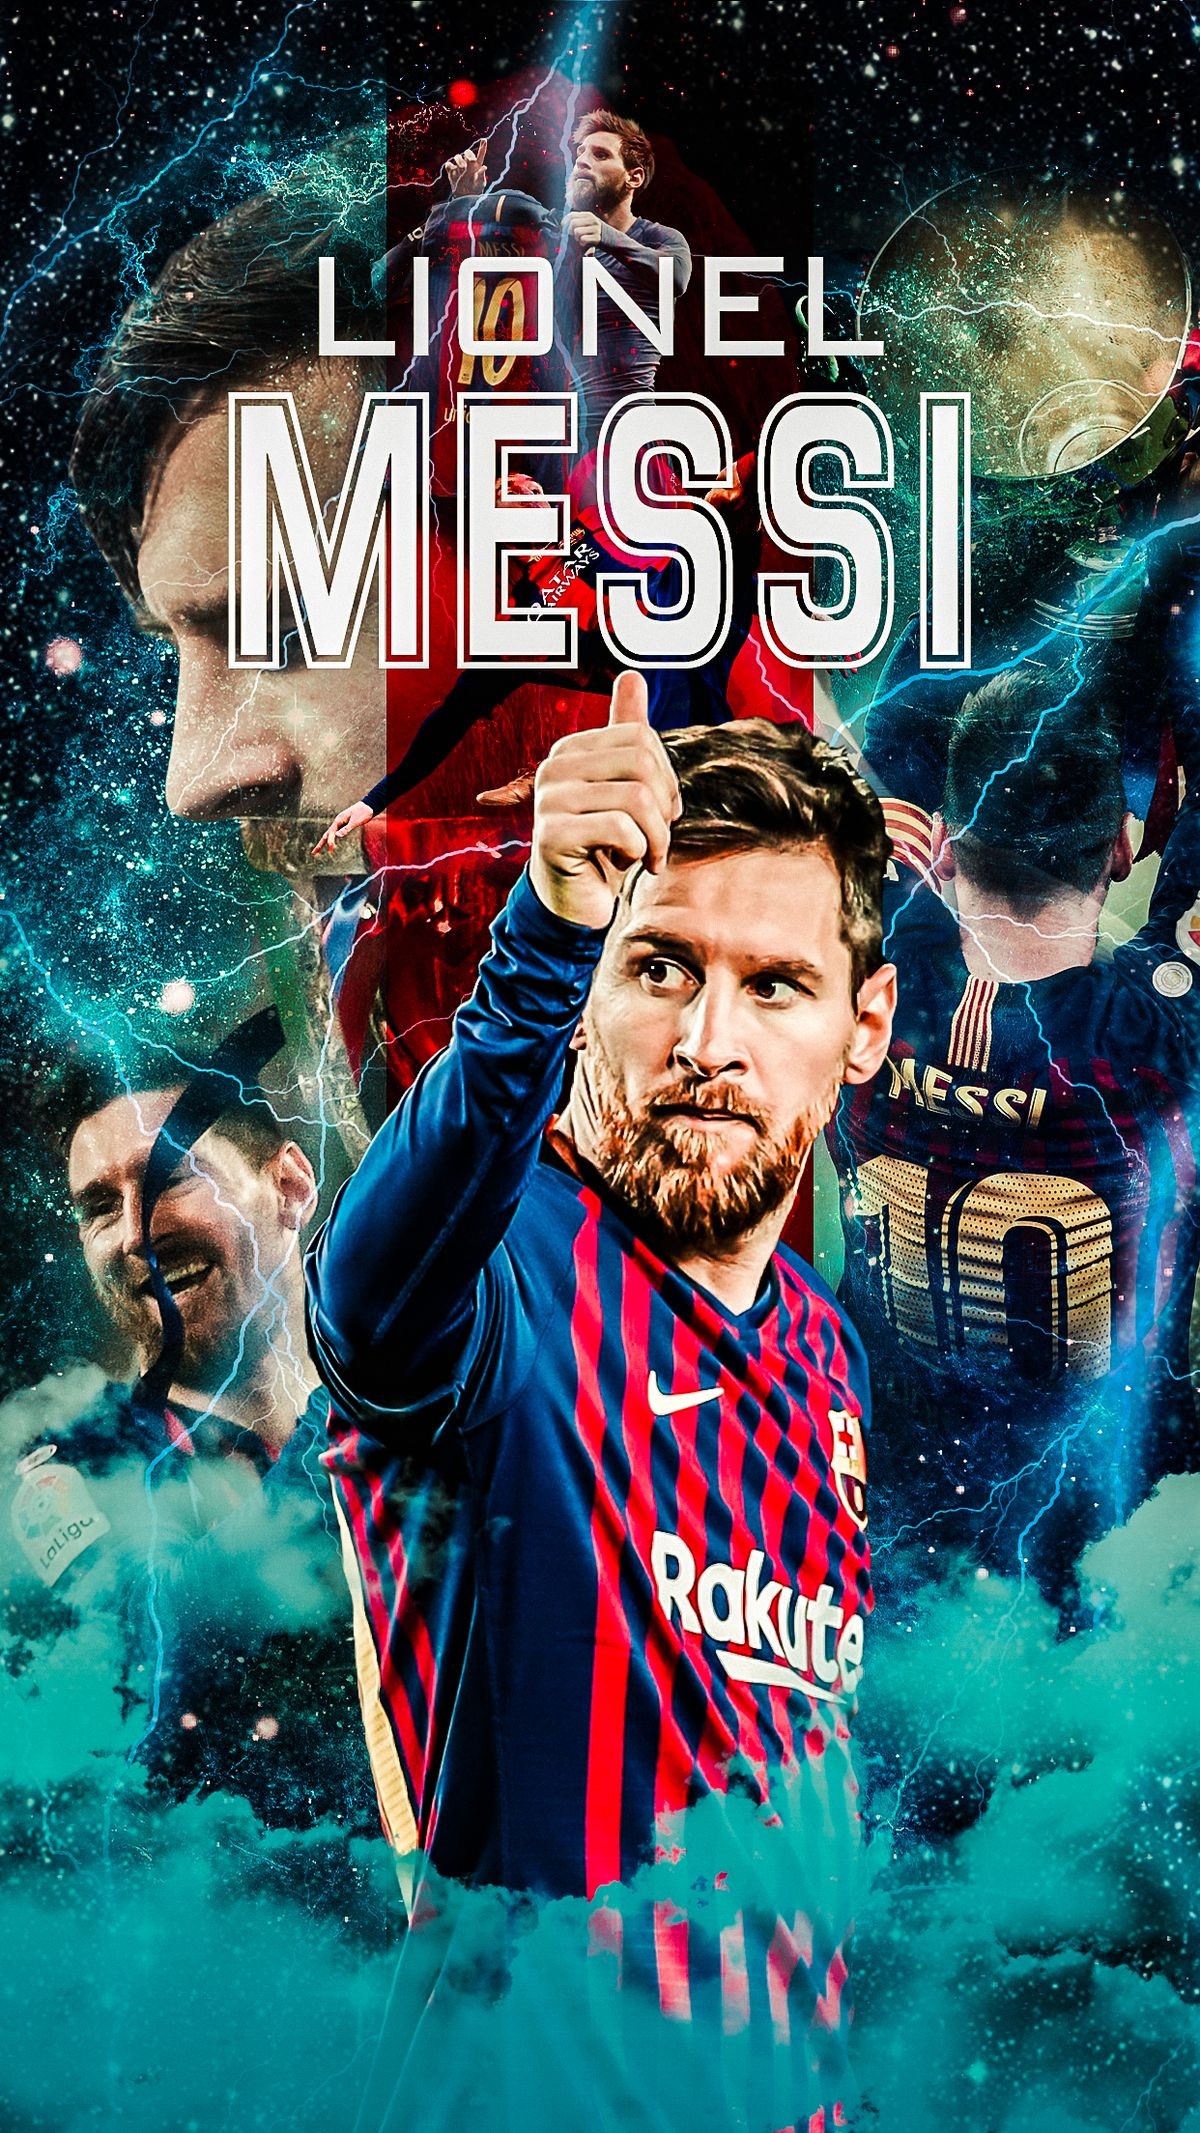 cool messi wallpapers